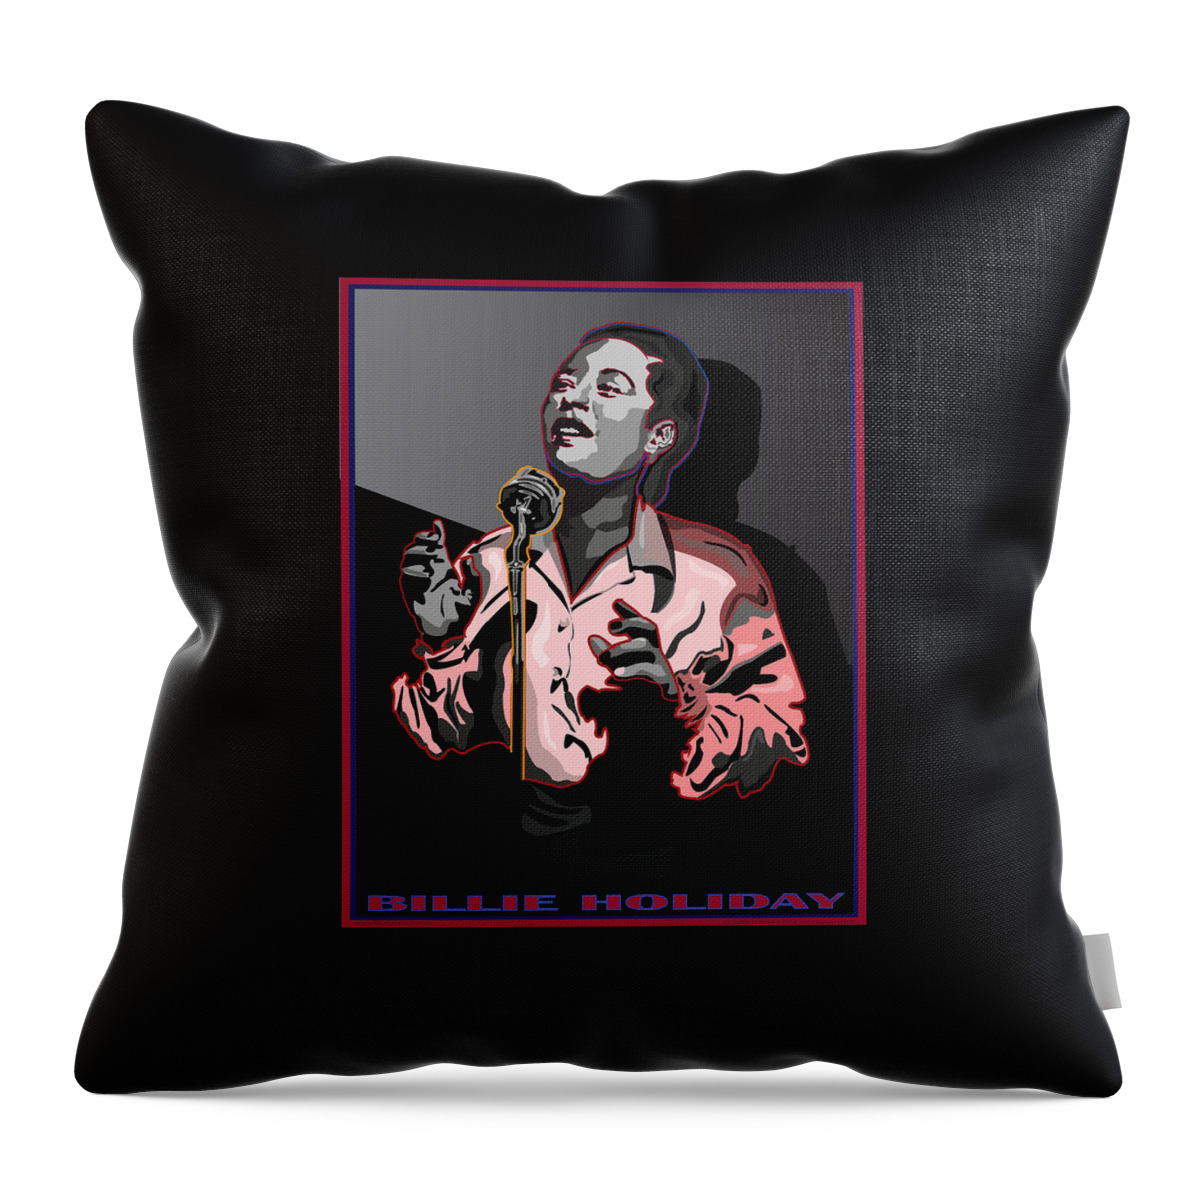 Billie Holiday Throw Pillow featuring the digital art Billie Holiday Jazz Singer by Larry Butterworth